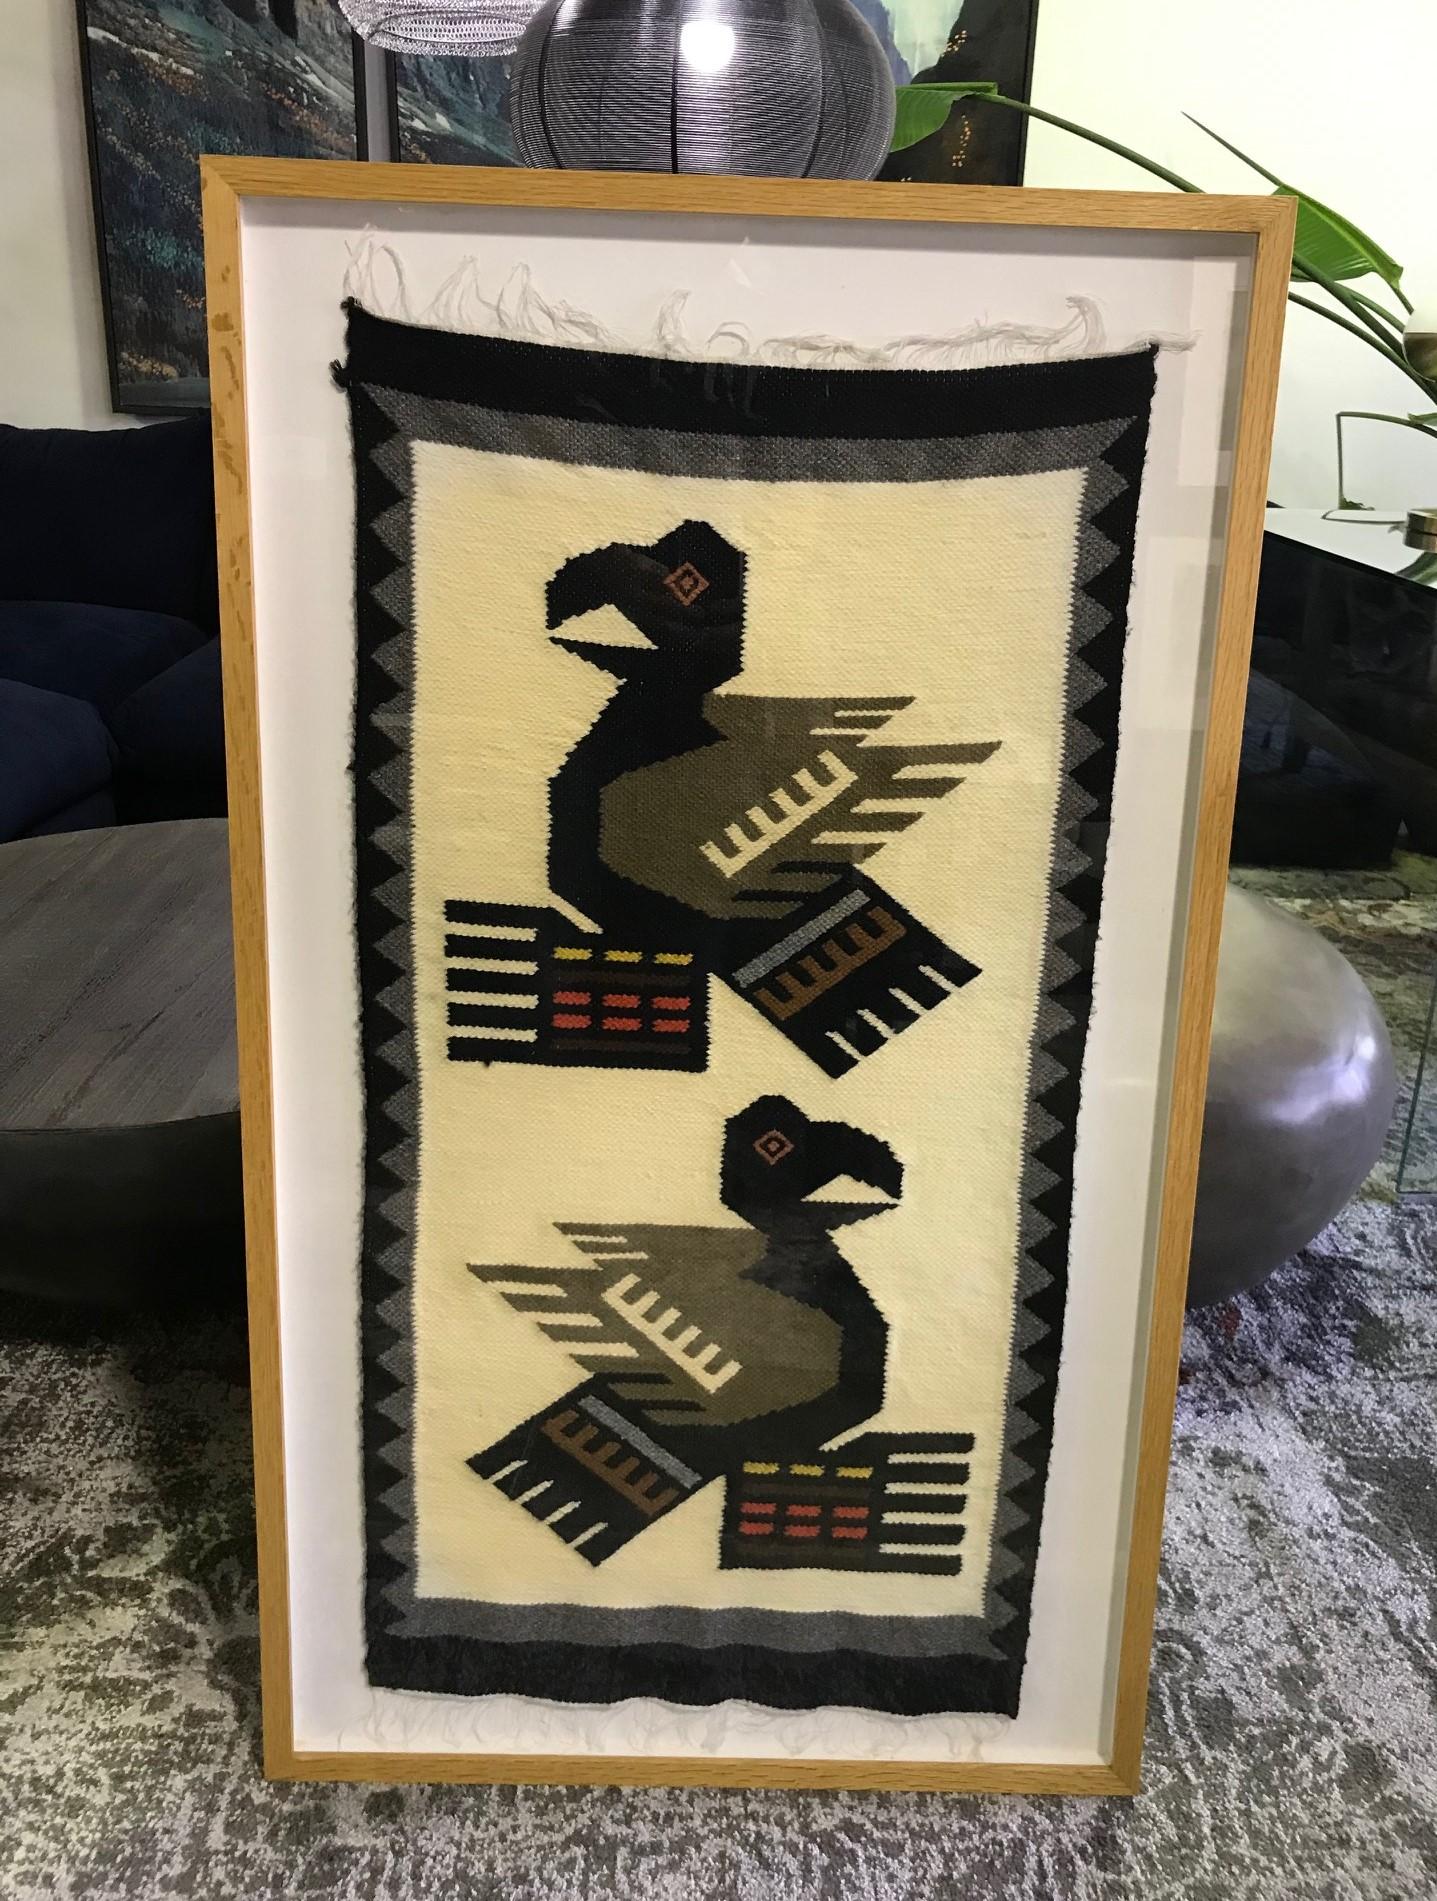 Beautifully designed and wonderfully covered dyed and handwoven Pacific Northwest Coast blanket or rug (likely Haida or Tlingit) featuring two colorful tribal birds.

Nicely framed.

We are listing as the 20th century as we do not know the exact